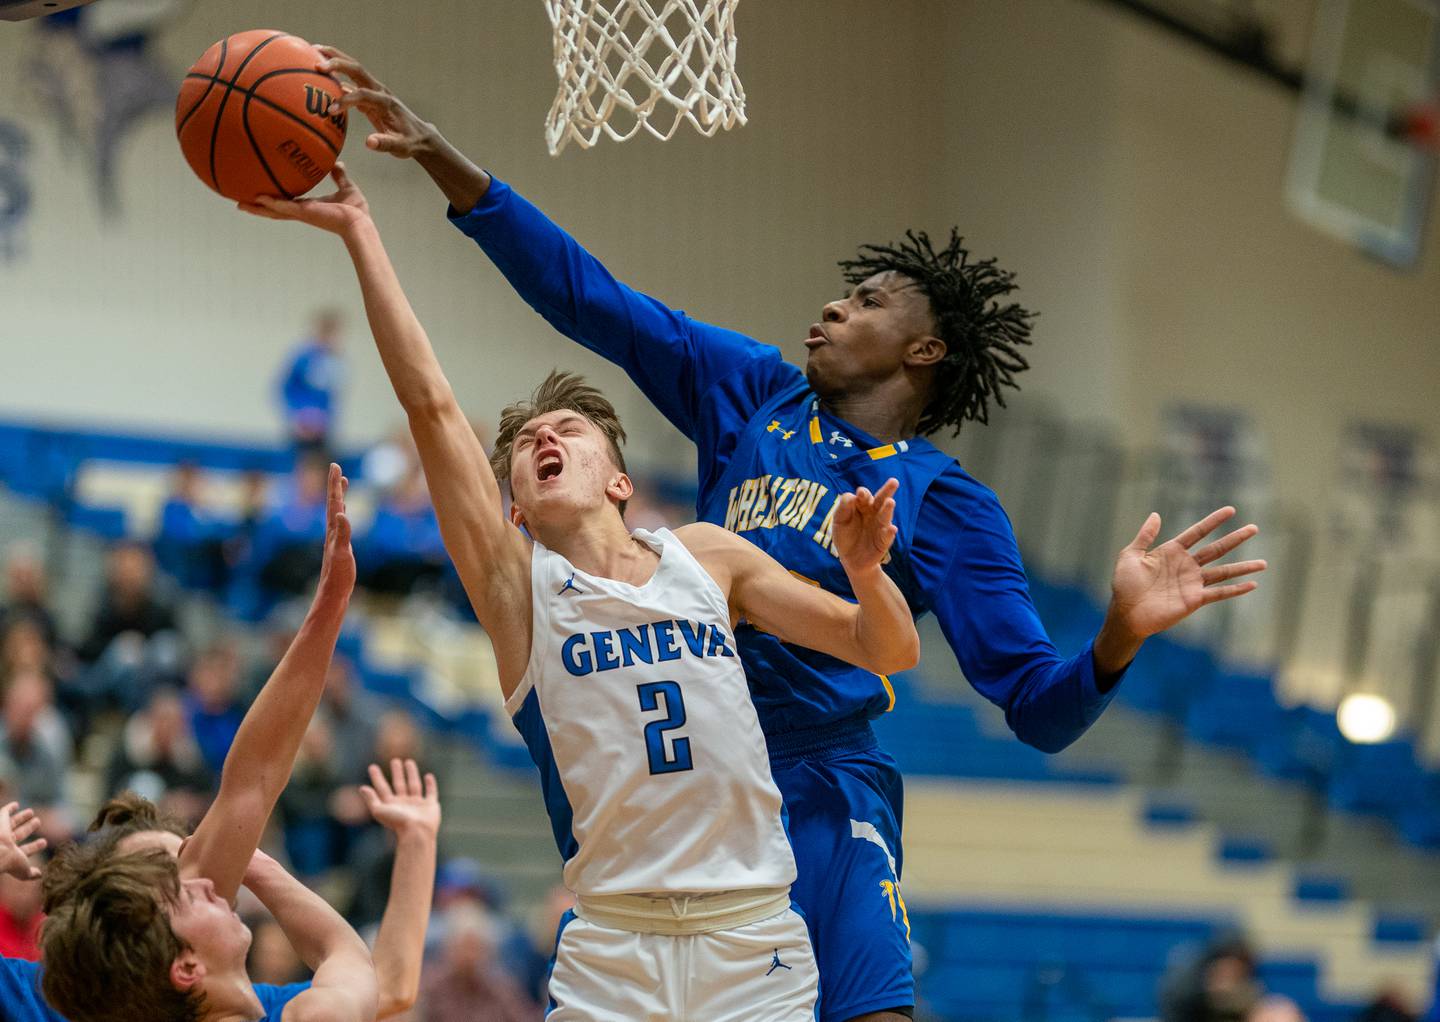 Wheaton North's Jalen Crues (33) blocks a shot attempt by Geneva’s Michael Lawrence (2) during a basketball game at Geneva High School on Friday, Jan 6, 2023.